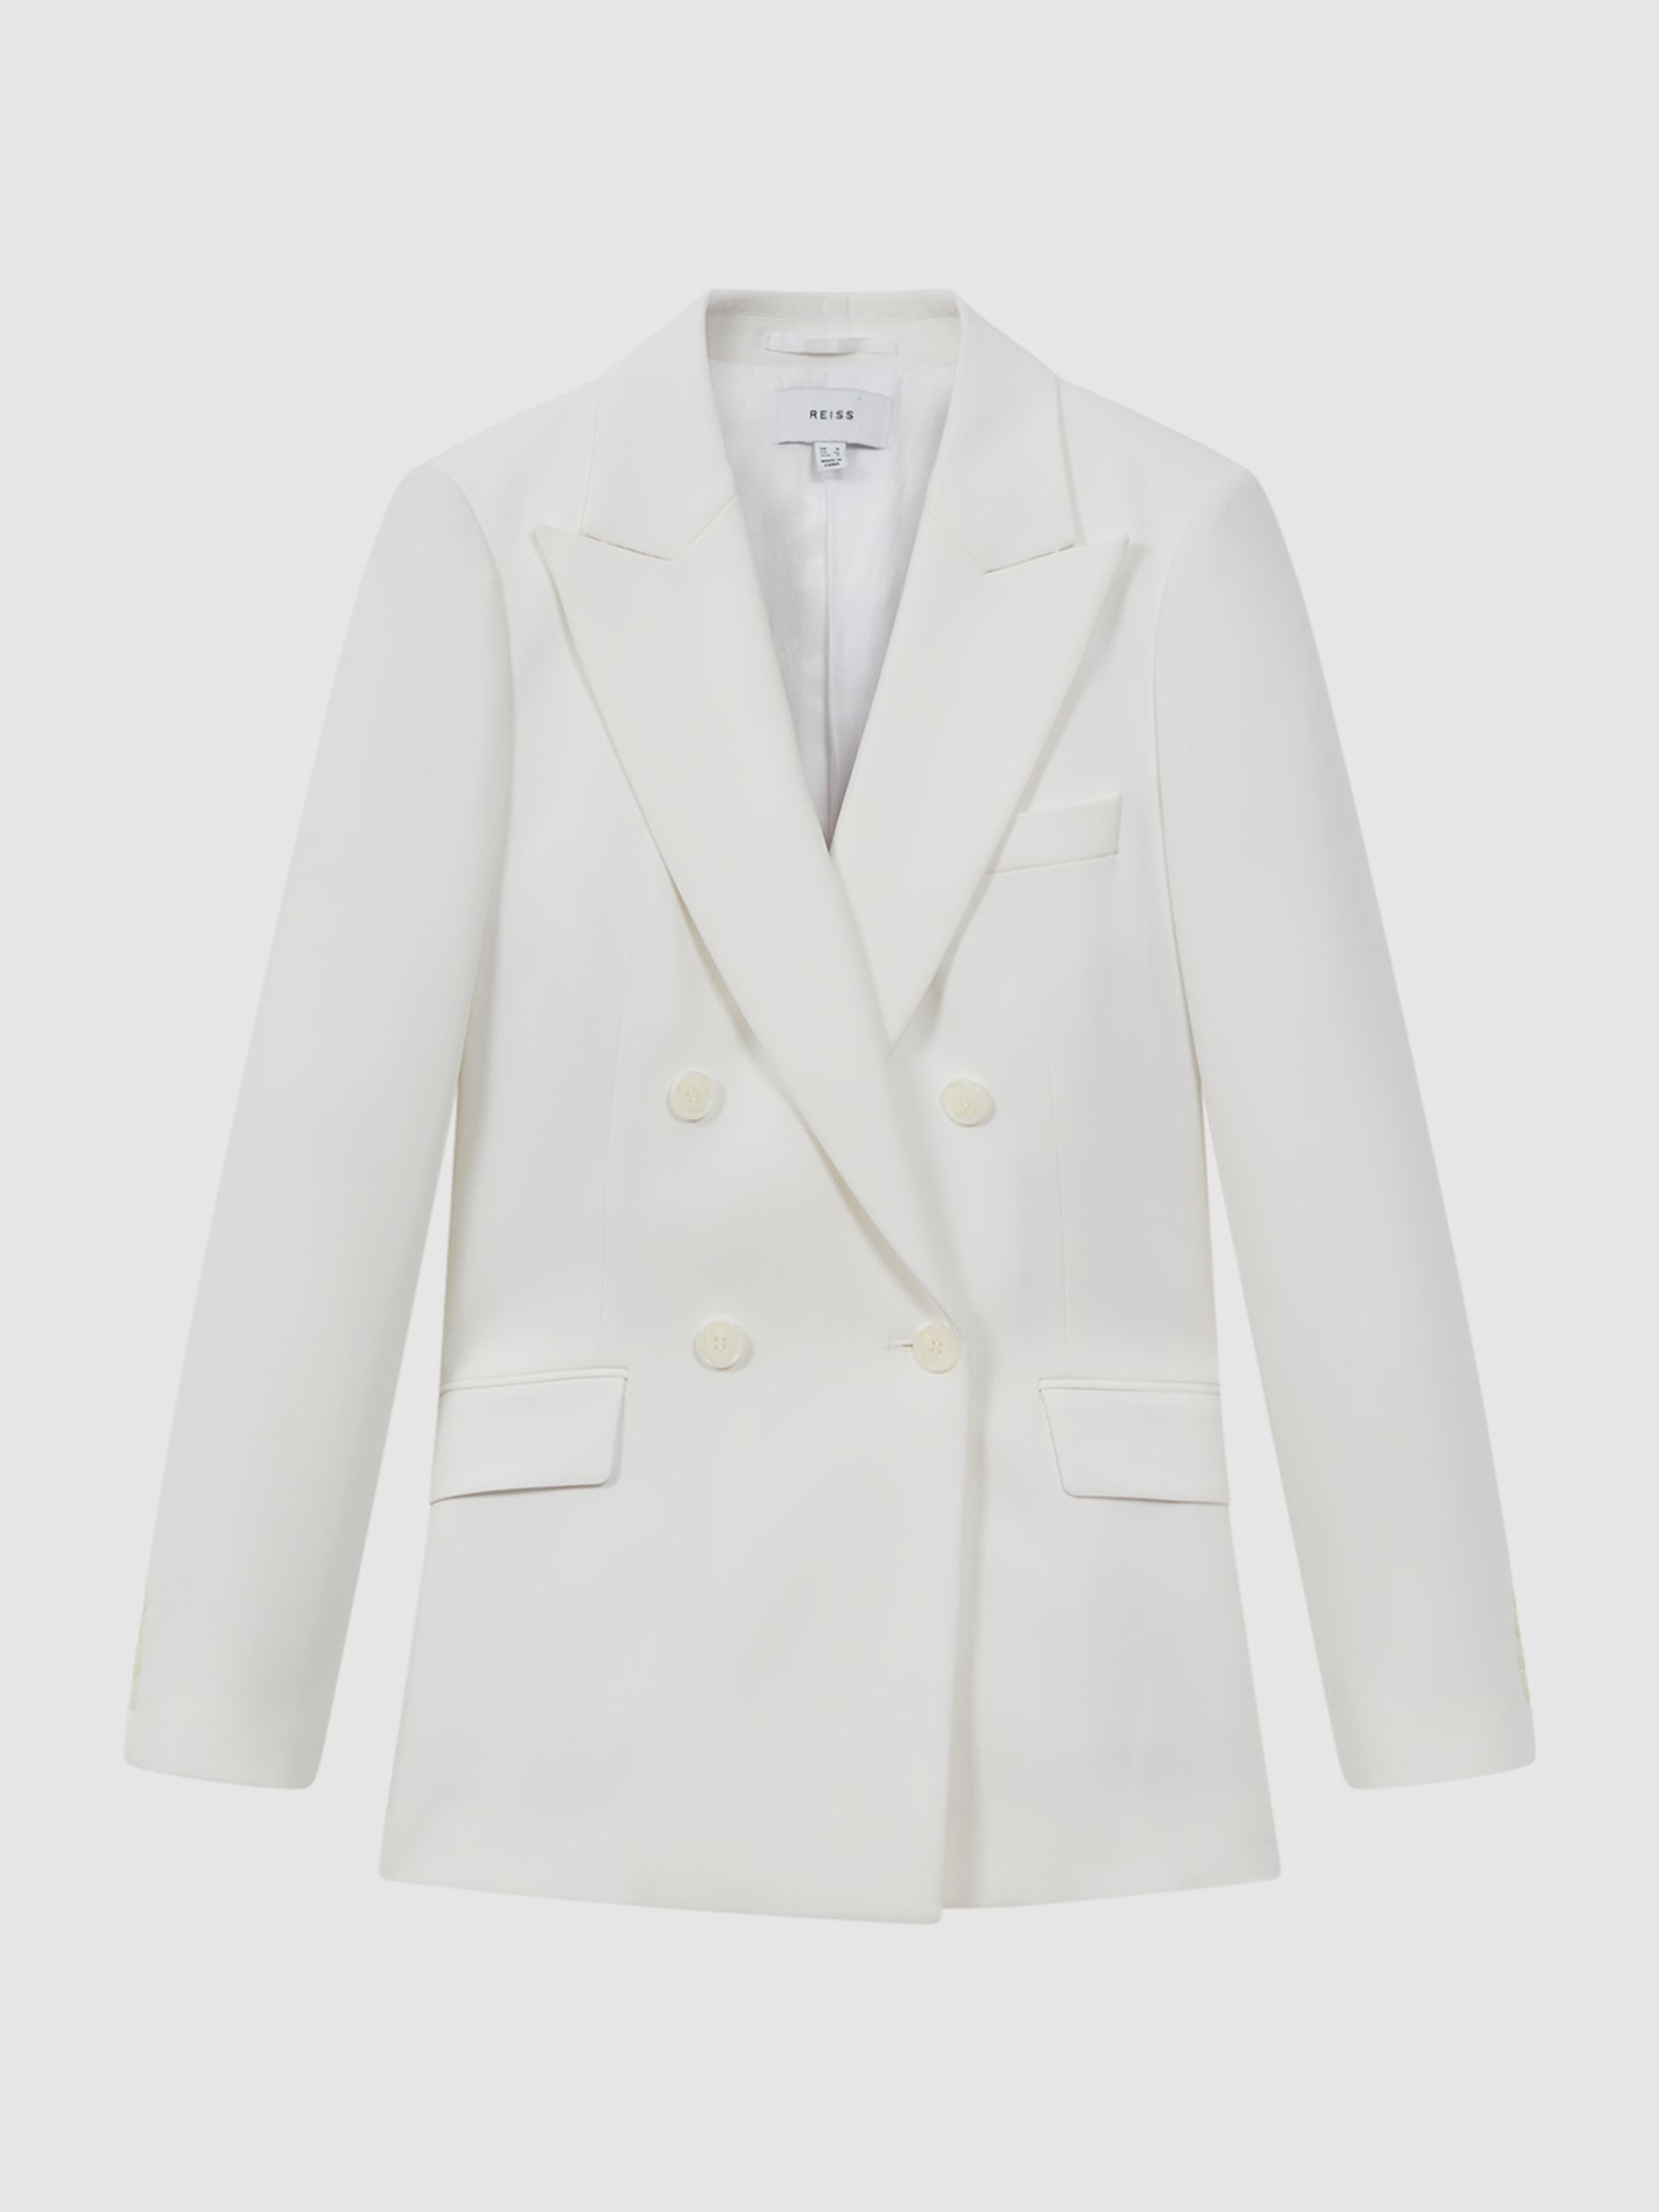 Reiss Sienna Double Breasted Crepe Suit Blazer - REISS